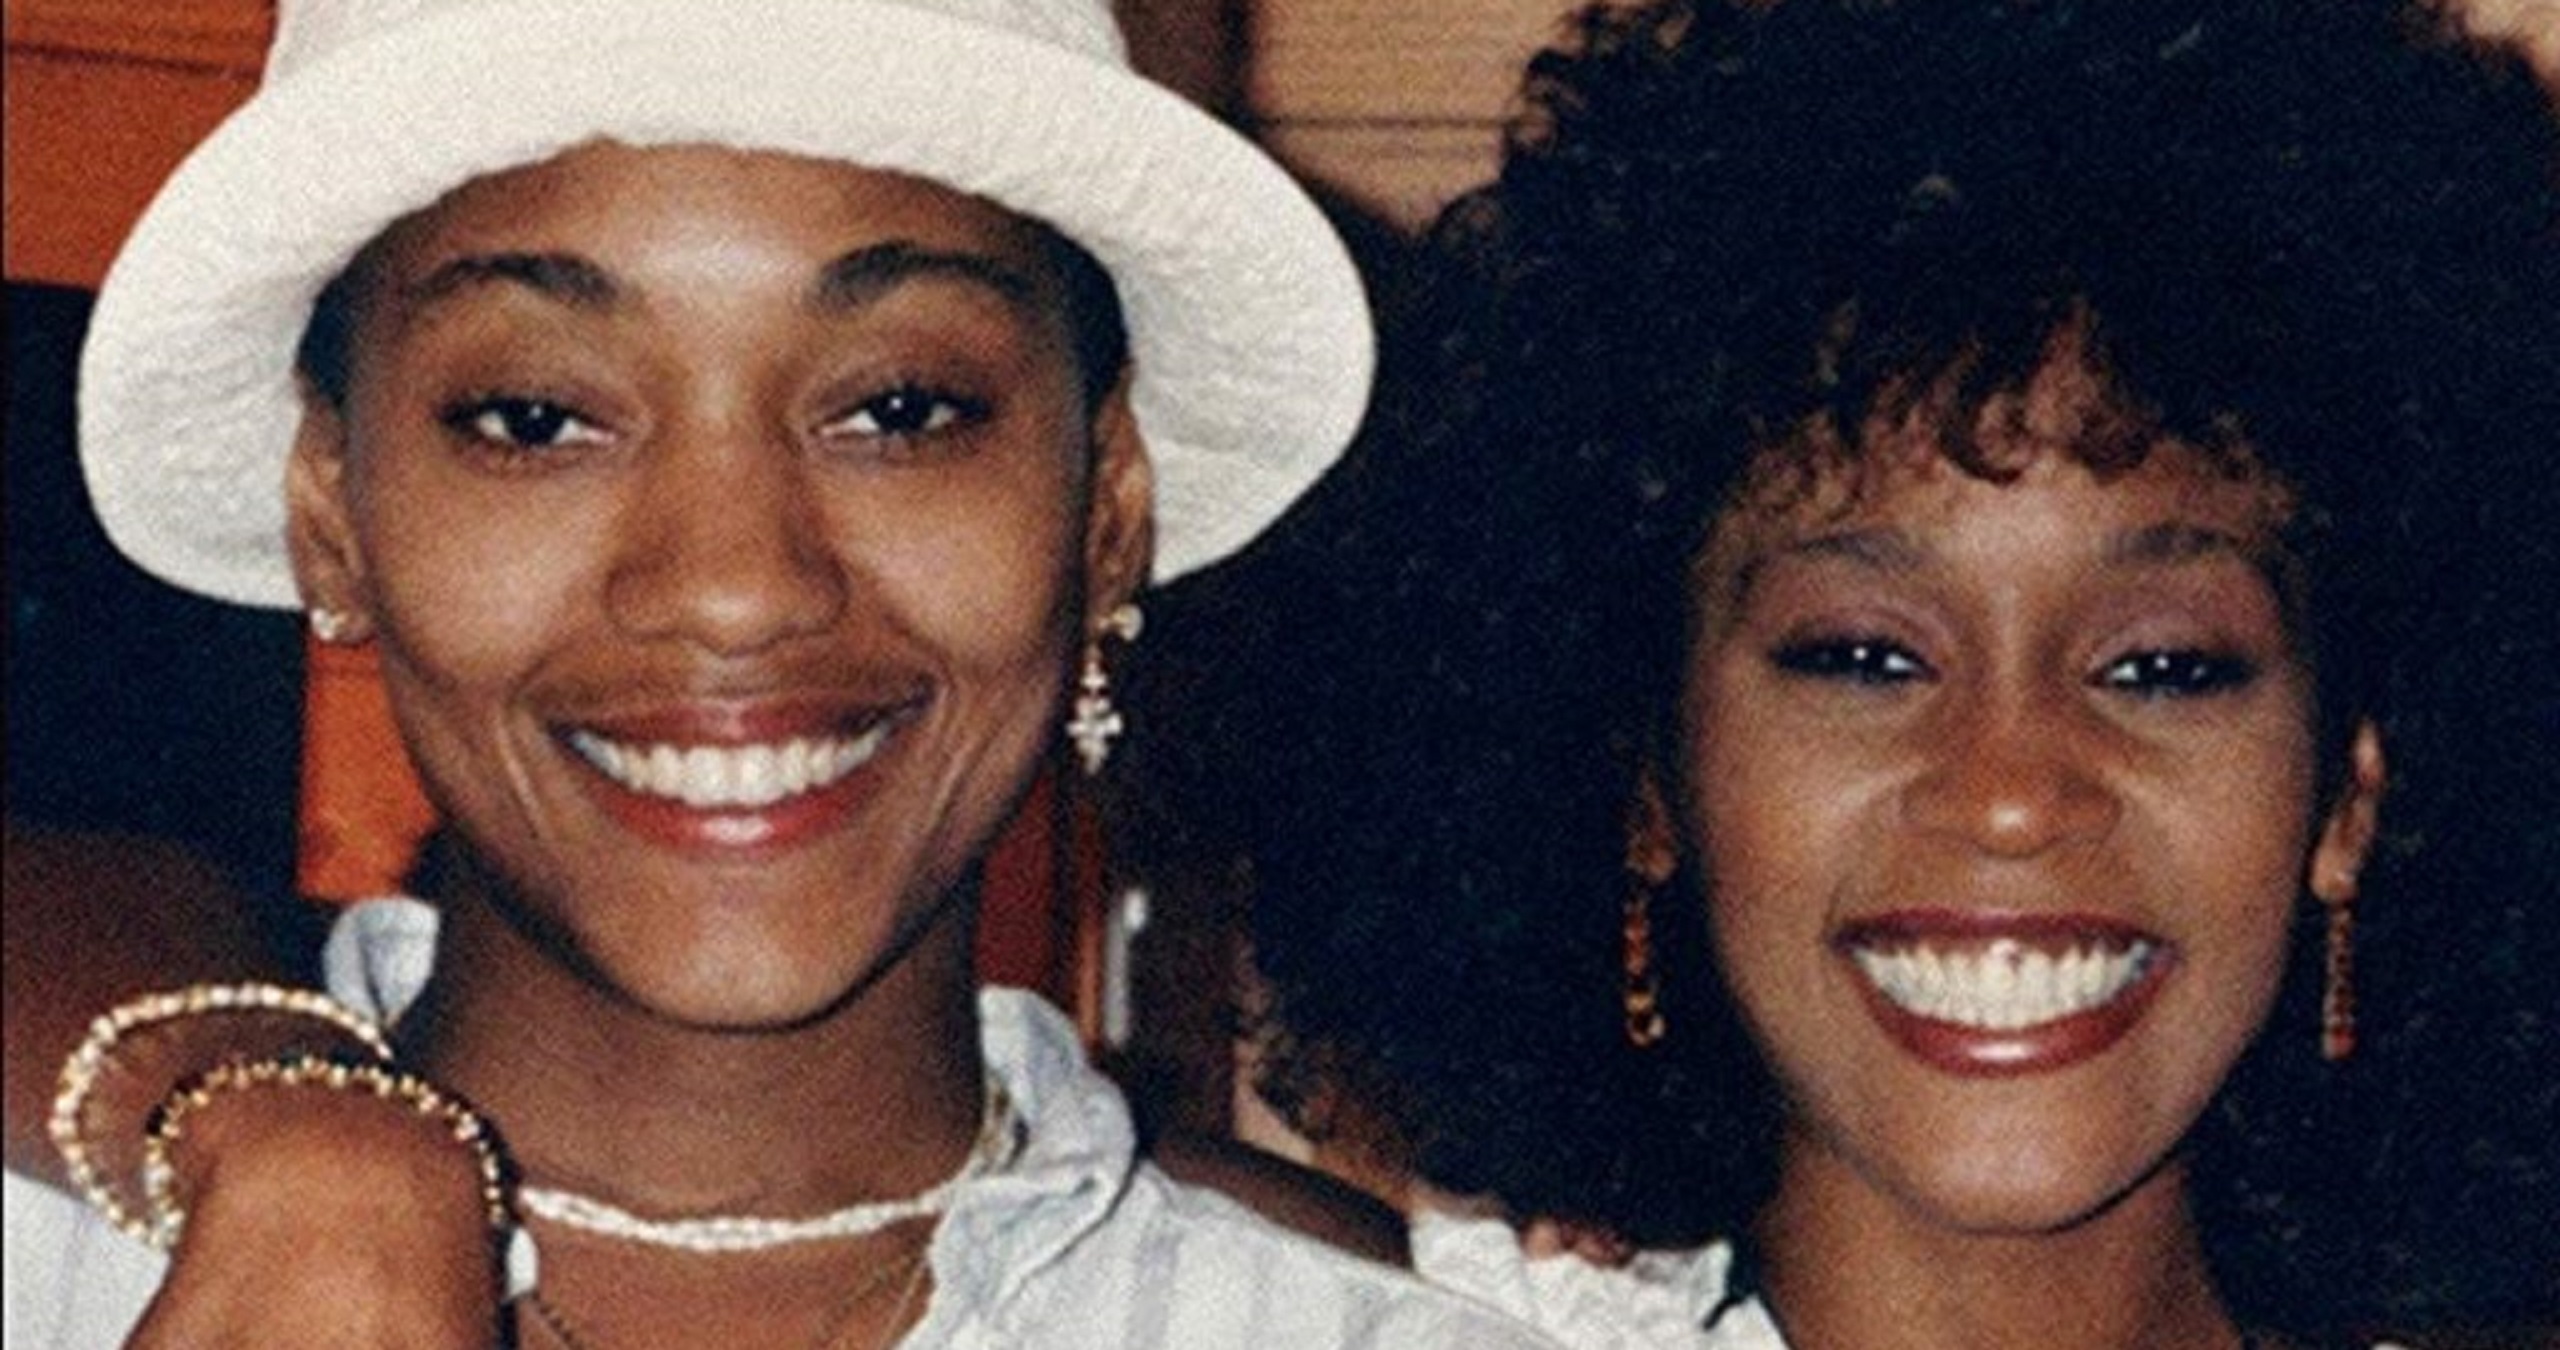 Whitney Houston’s Old-Time Friend Robyn Crawford Talks Their Romantic Relationship, “We Wanted To Be Together”